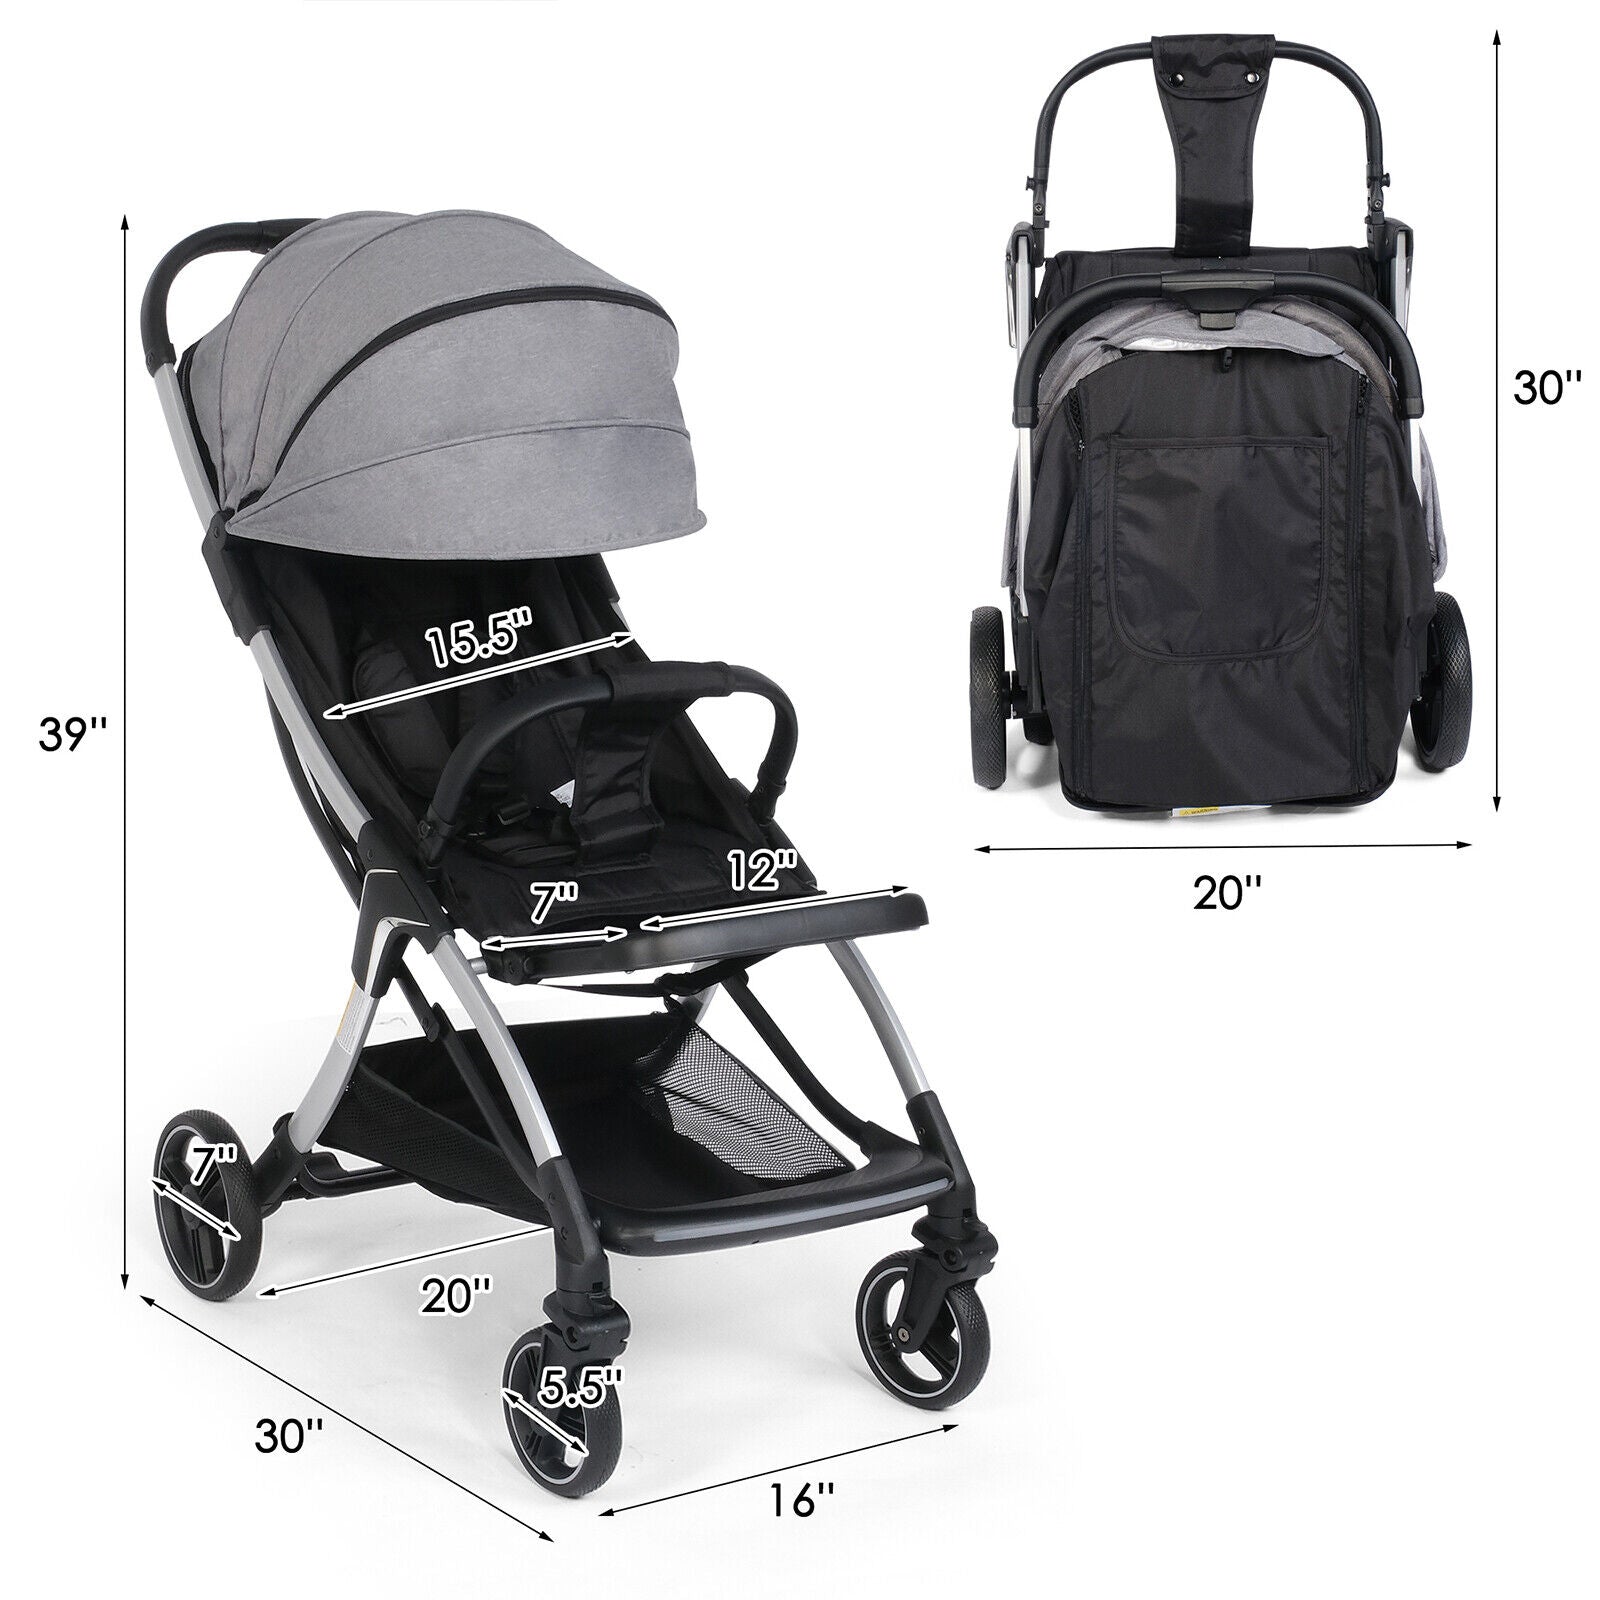 (Out of Stock) Lightweight Baby Stroller w/ Adjustable Canopy & Reclining Seat, One-Hand Quick Folding Stroller